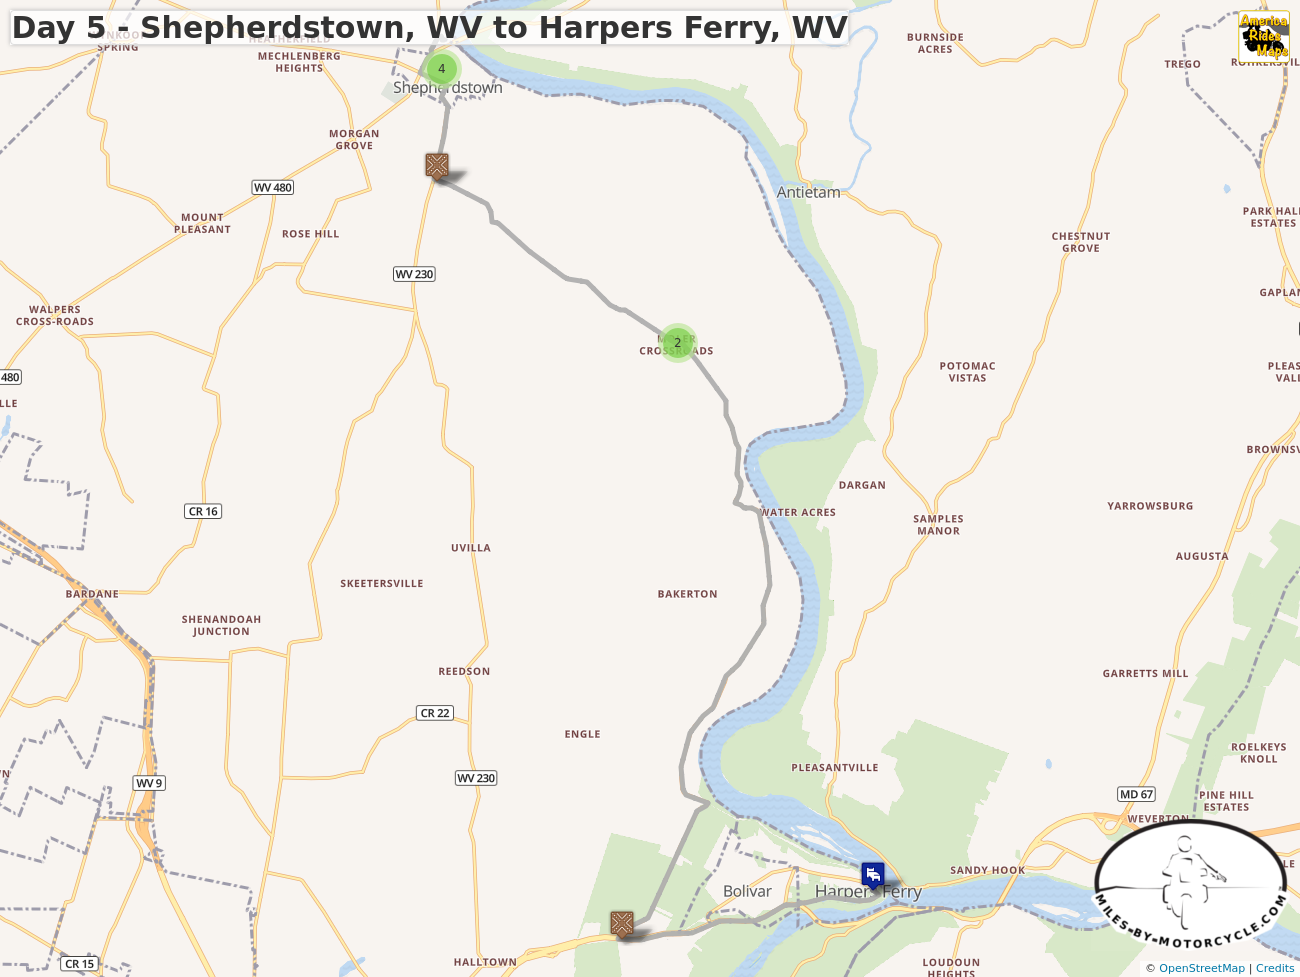 Day 5 - Shepherdstown, WV to Harpers Ferry, WV